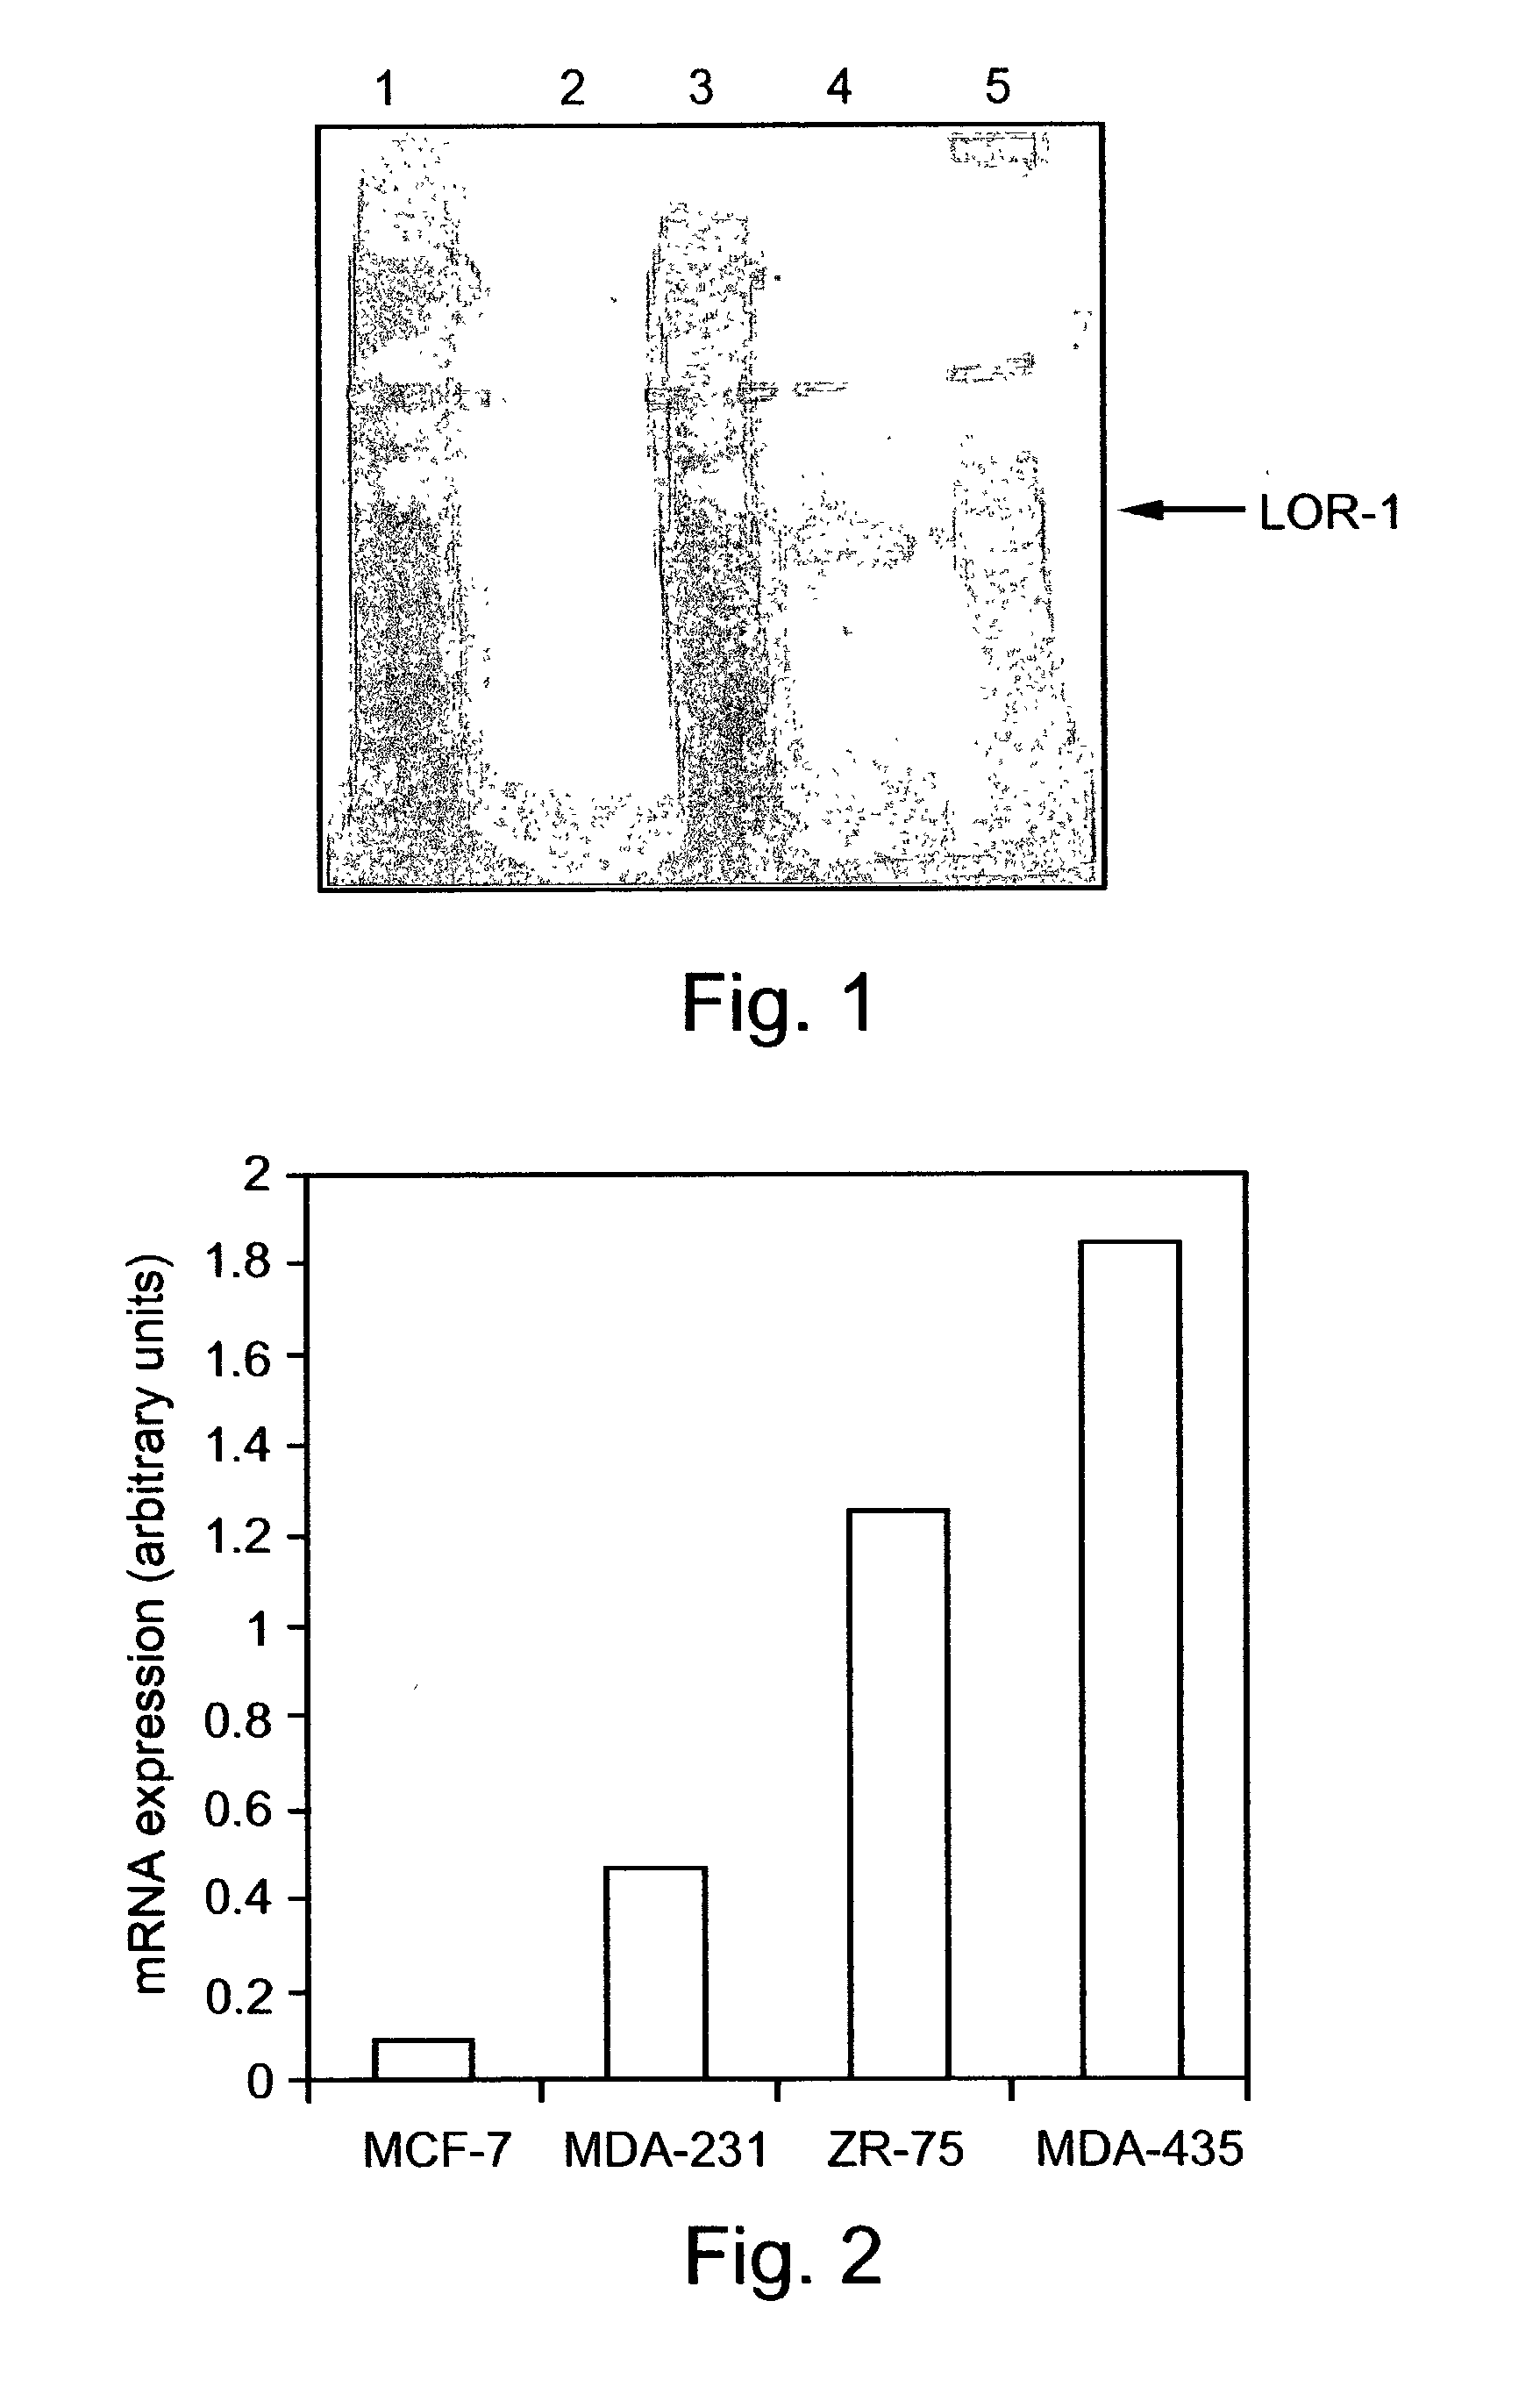 Pharmaceutical compositions and methods useful for modulating angiogenesis and inhibiting metastasis and tumor fibrosis